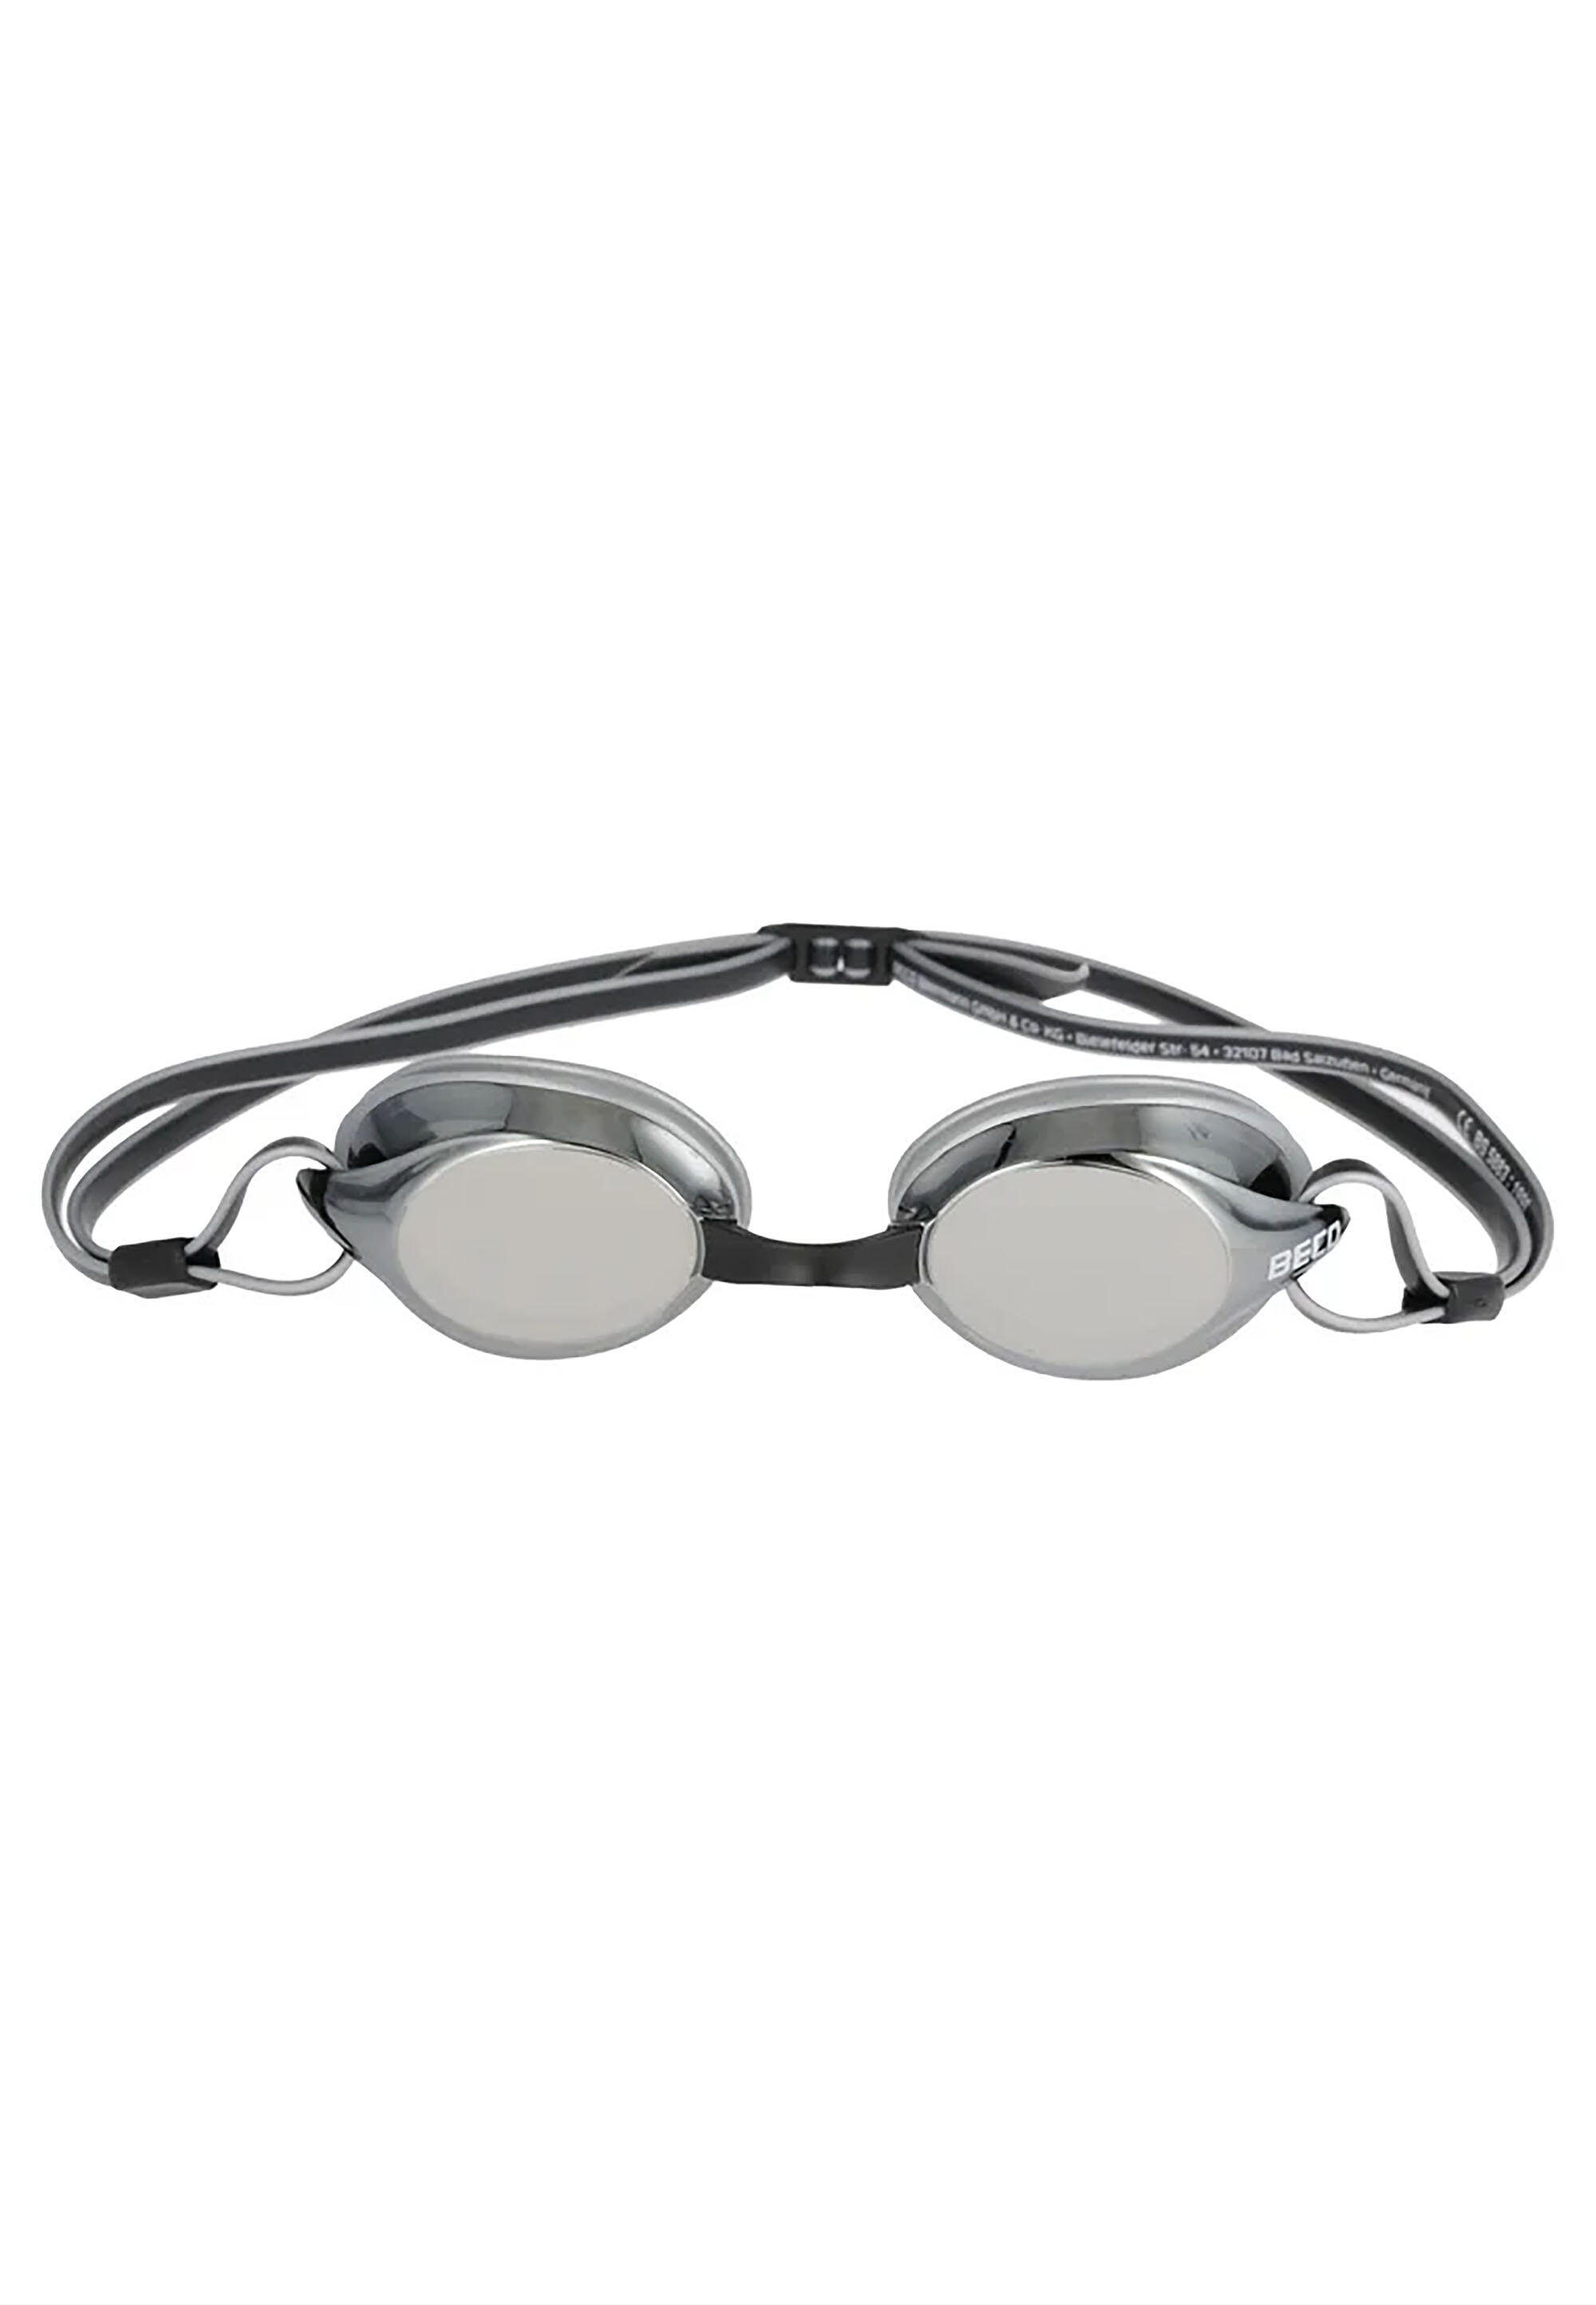 BECO Beco 9933 Silver Mirrored Competition Goggles